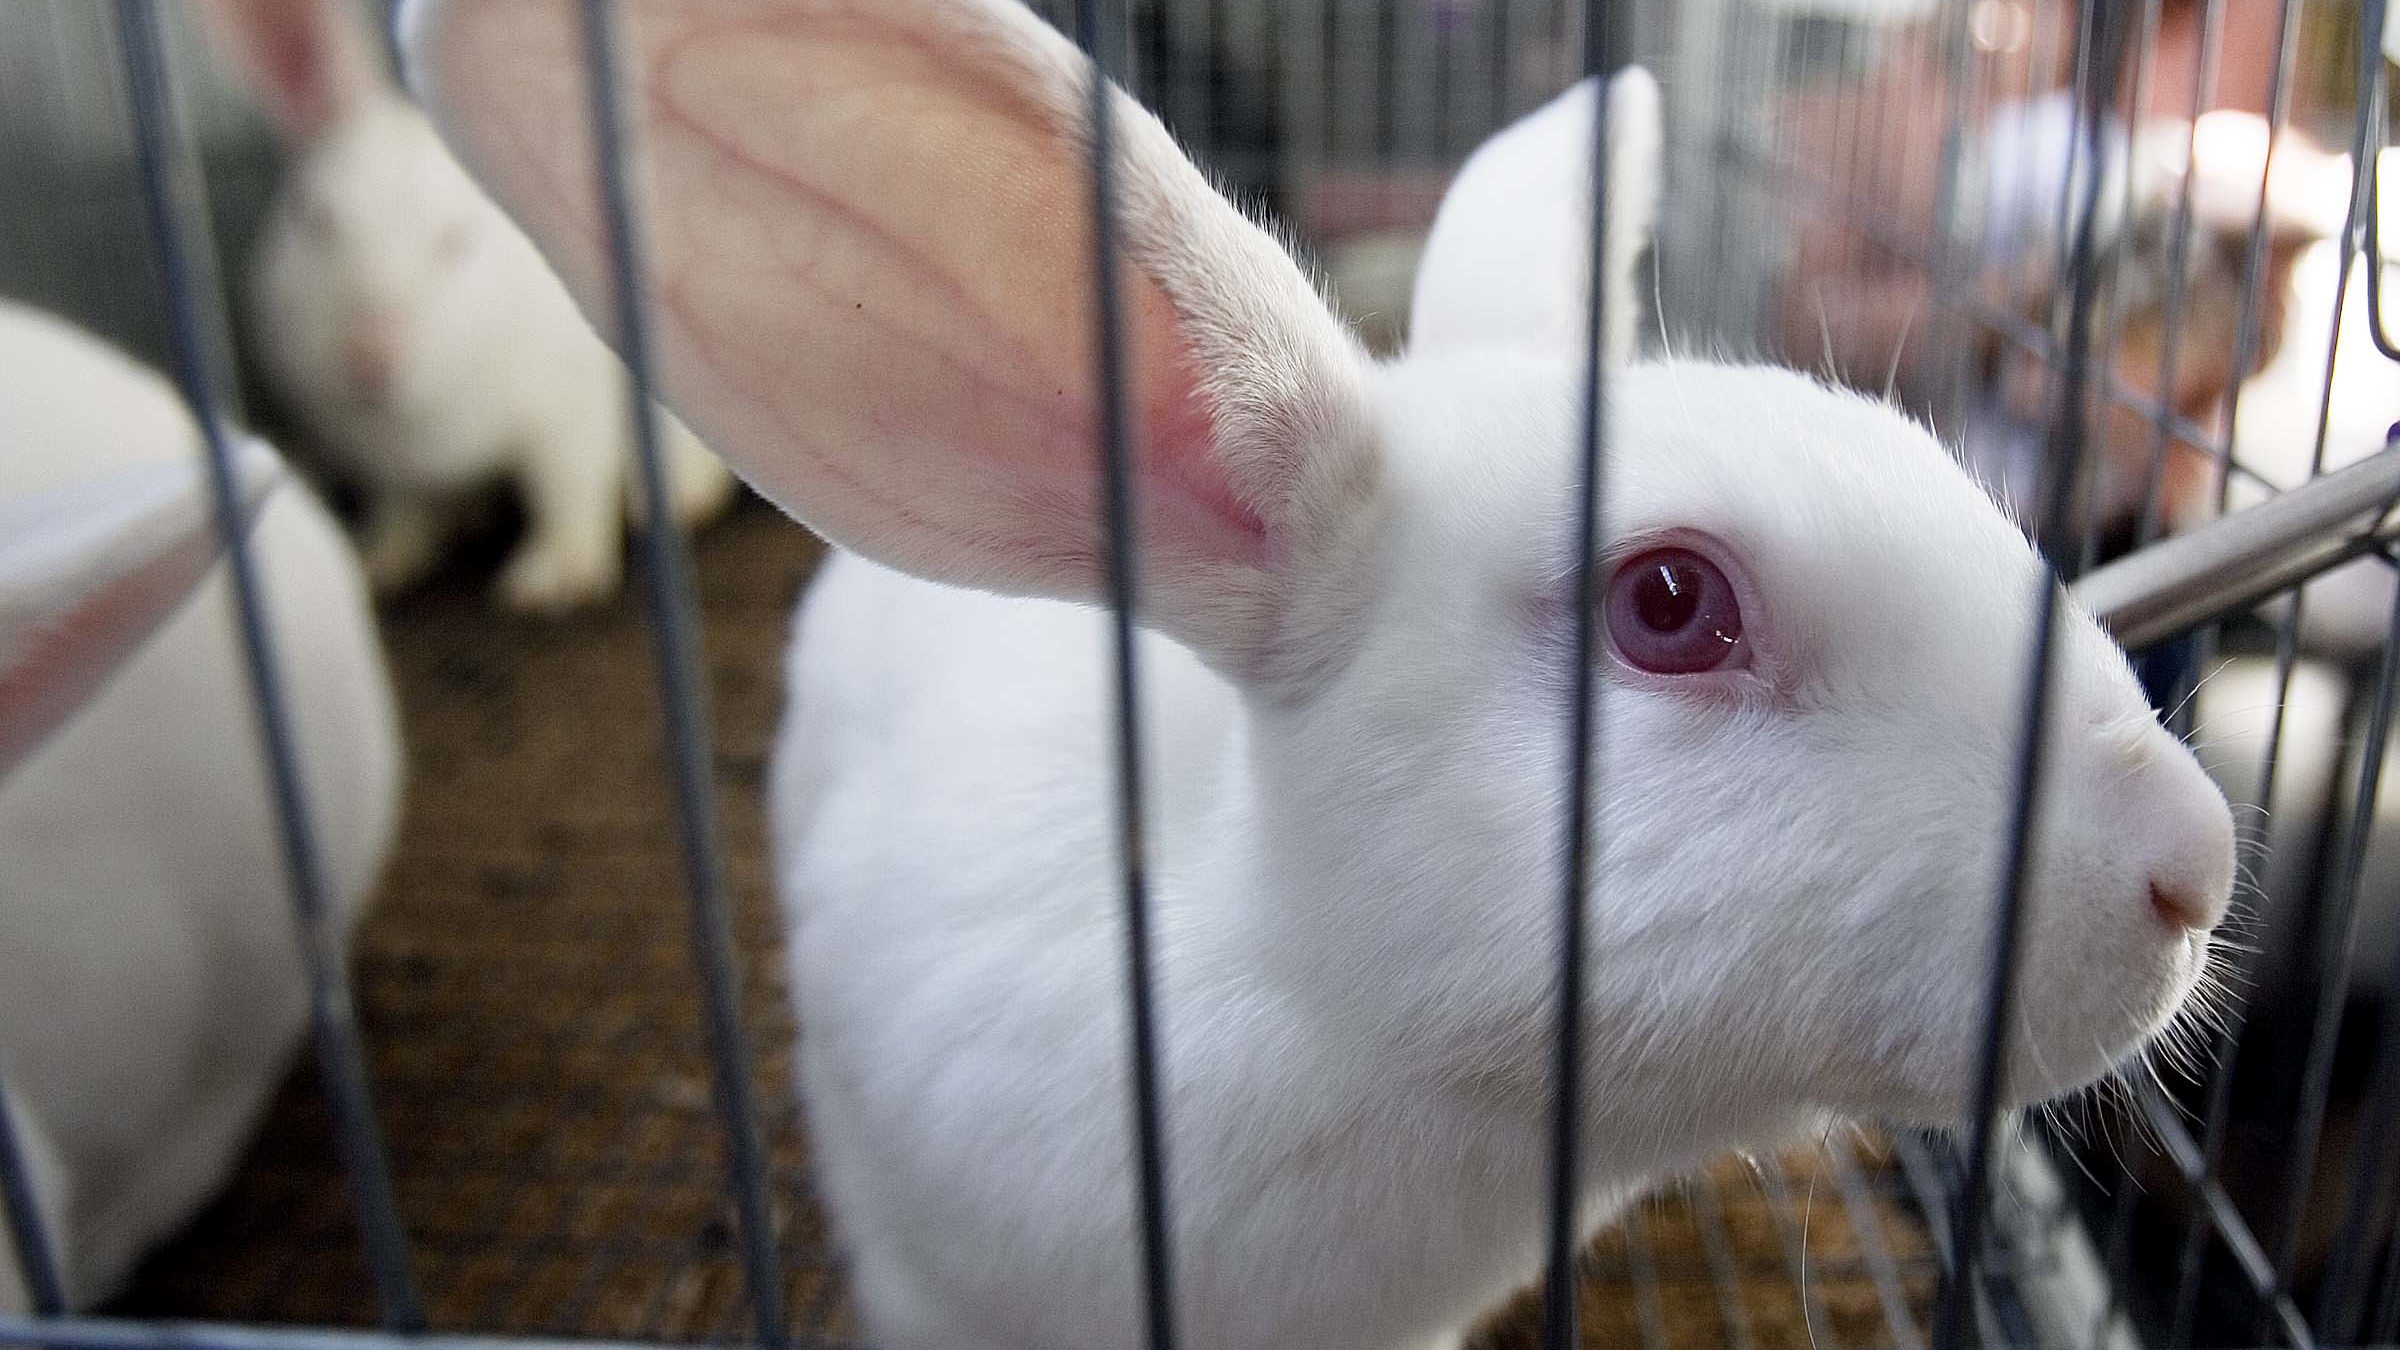 A bunch of rabbits were reported in the Butterfield Canyon area near Herriman, Salt Lake County Ser...